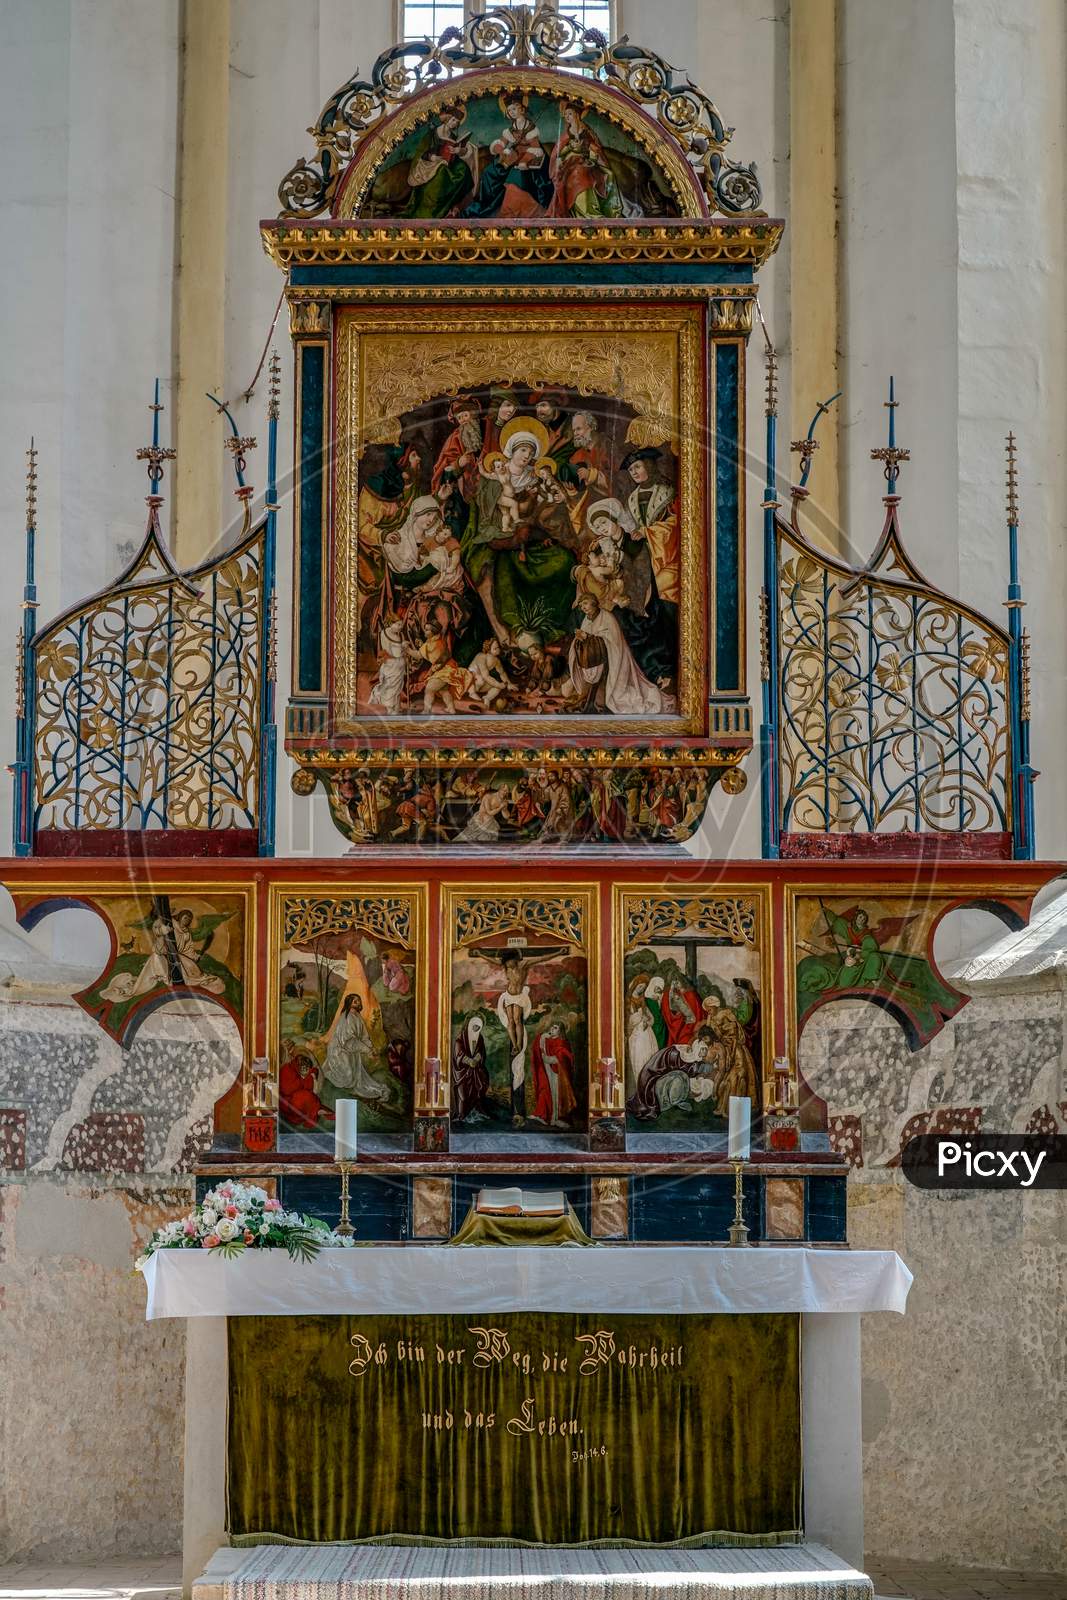 Sighisoara, Transylvania/Romania - September 17 : View Of The Altar Of The Church On The Hill In Sighisoara Transylvania Romania On September 17, 2018